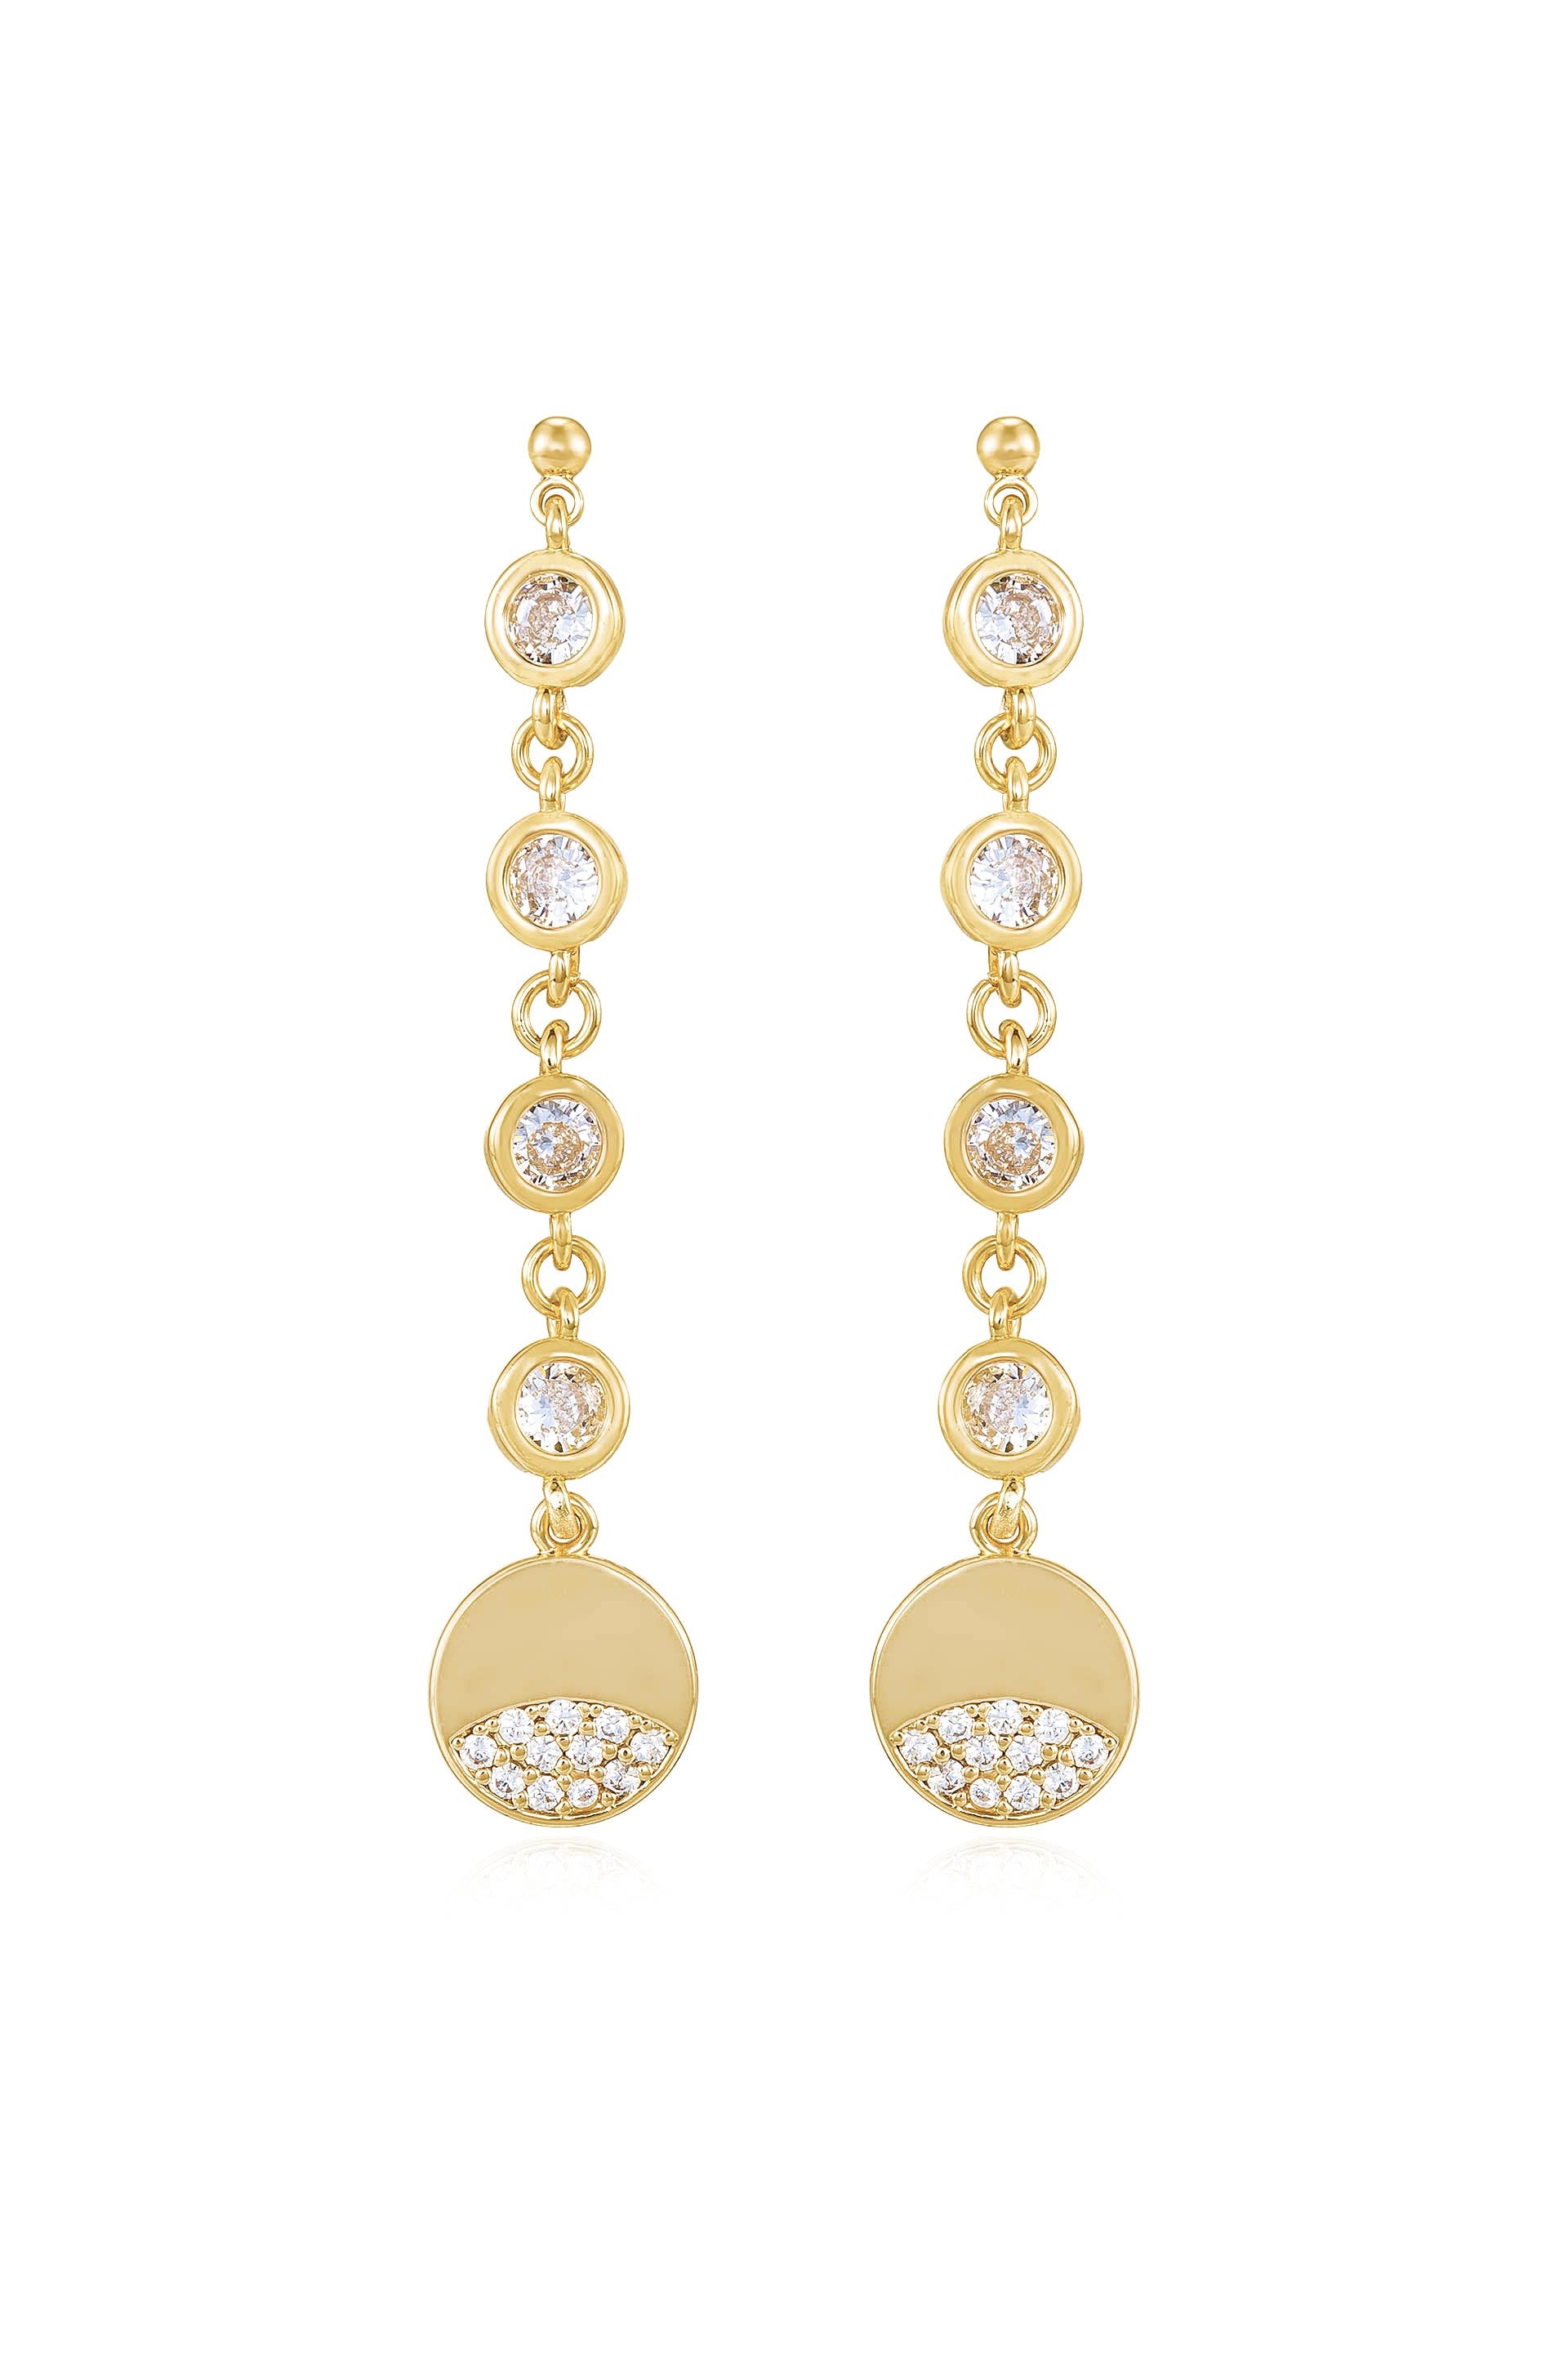 Dangle Dipped 18k Gold Plated and Crystal Earrings